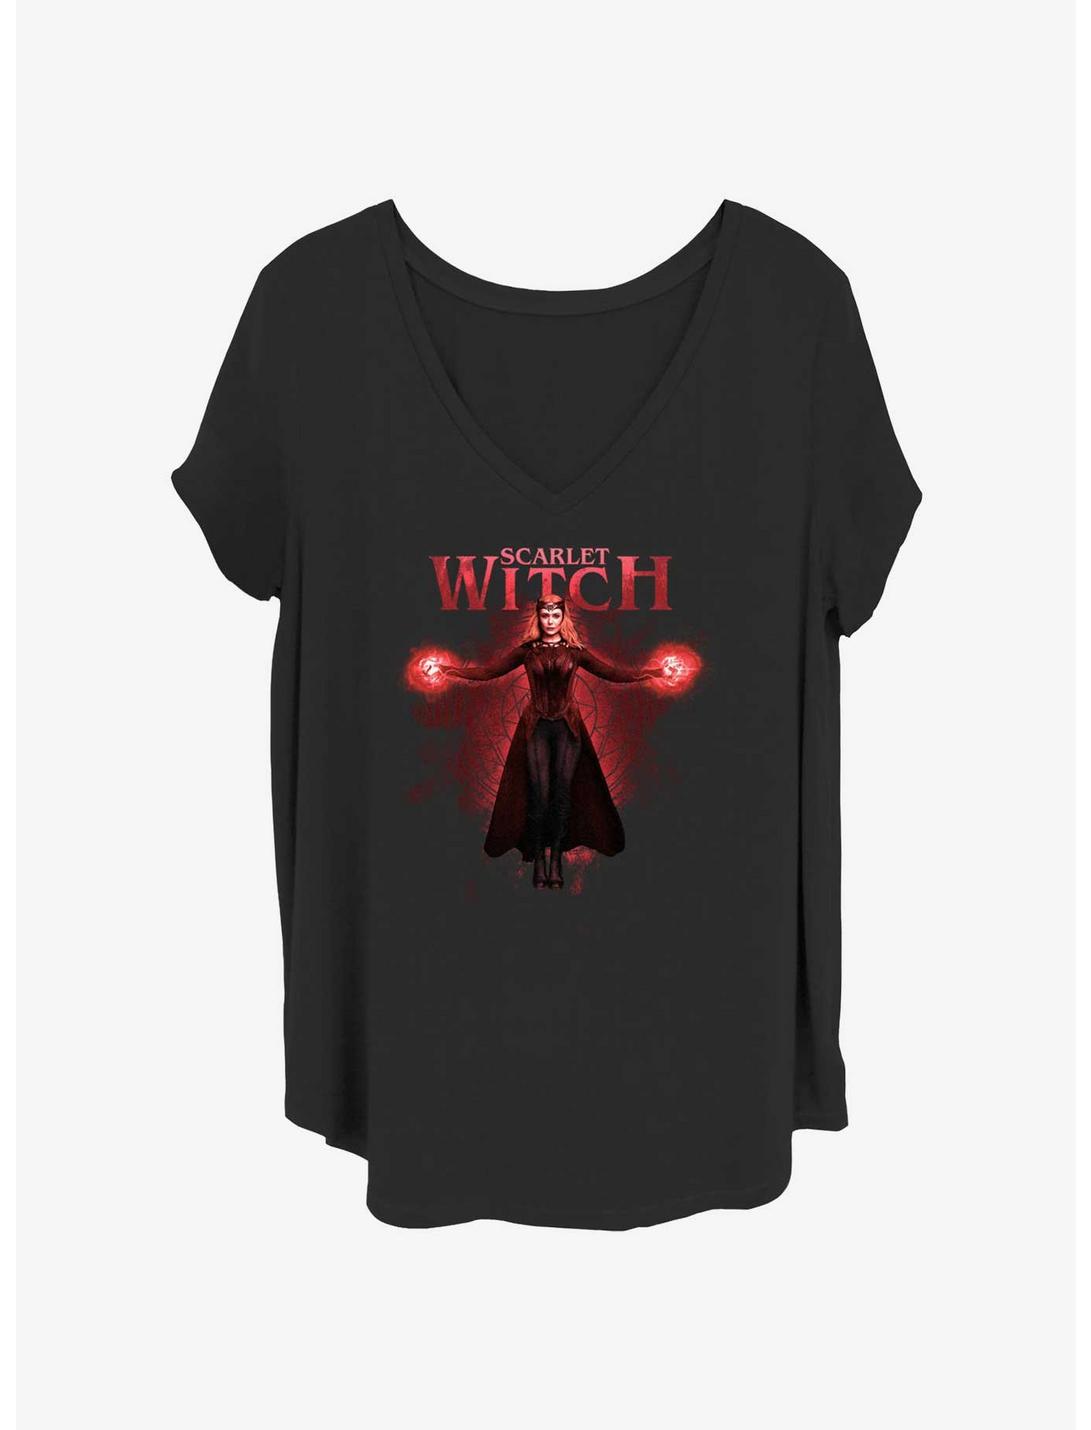 Marvel Doctor Strange in the Multiverse of Madness Scarlet Witch Girls T-Shirt Plus Size, BLACK, hi-res